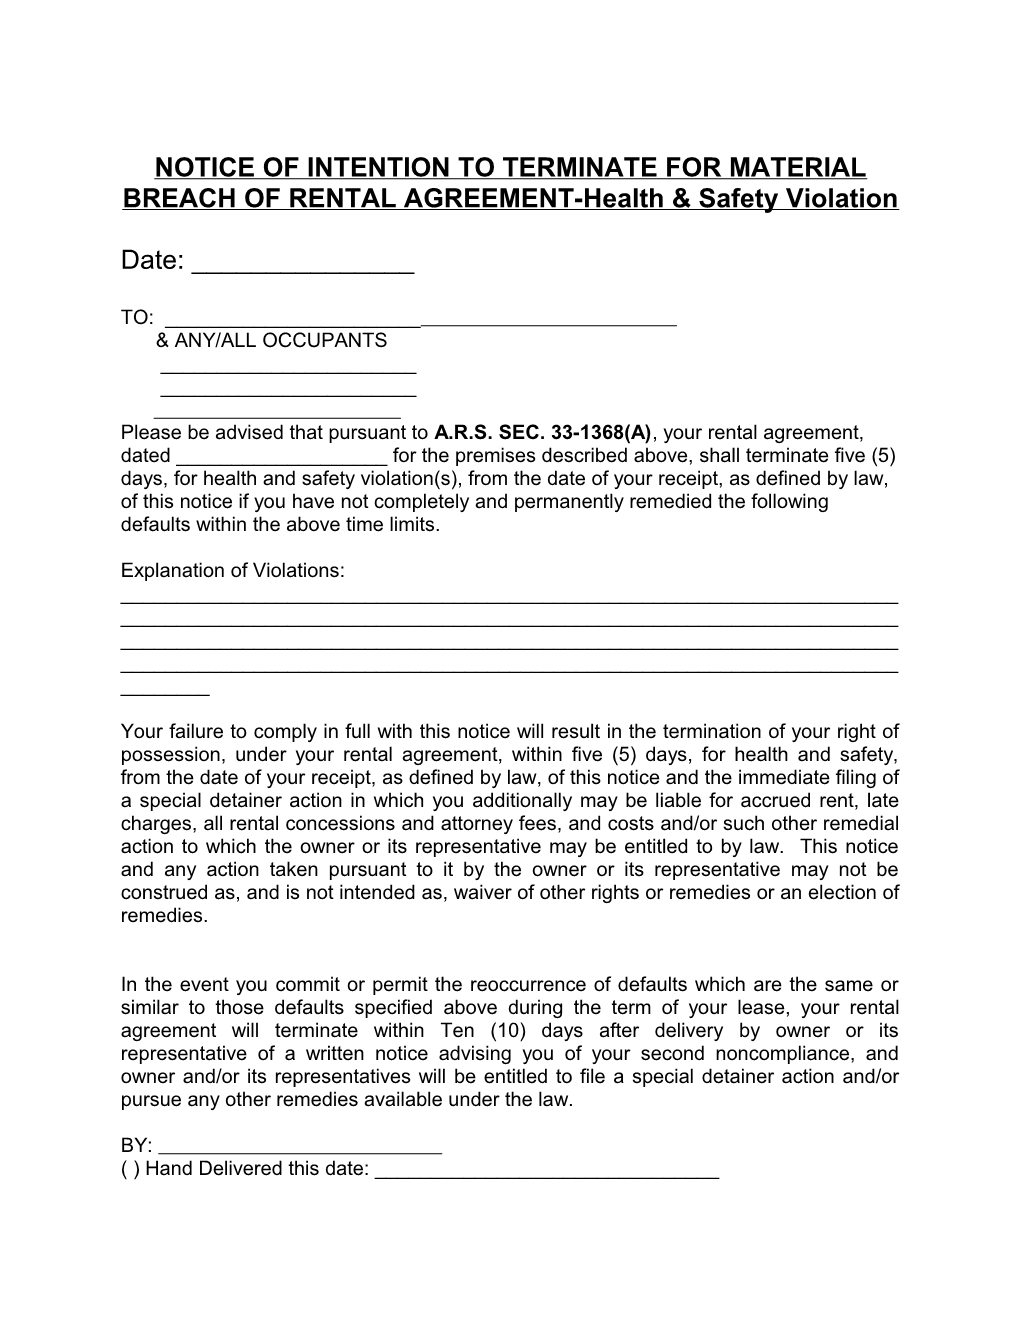 NOTICE of INTENTION to TERMINATE for MATERIAL BREACH of RENTAL AGREEMENT-Health & Safety